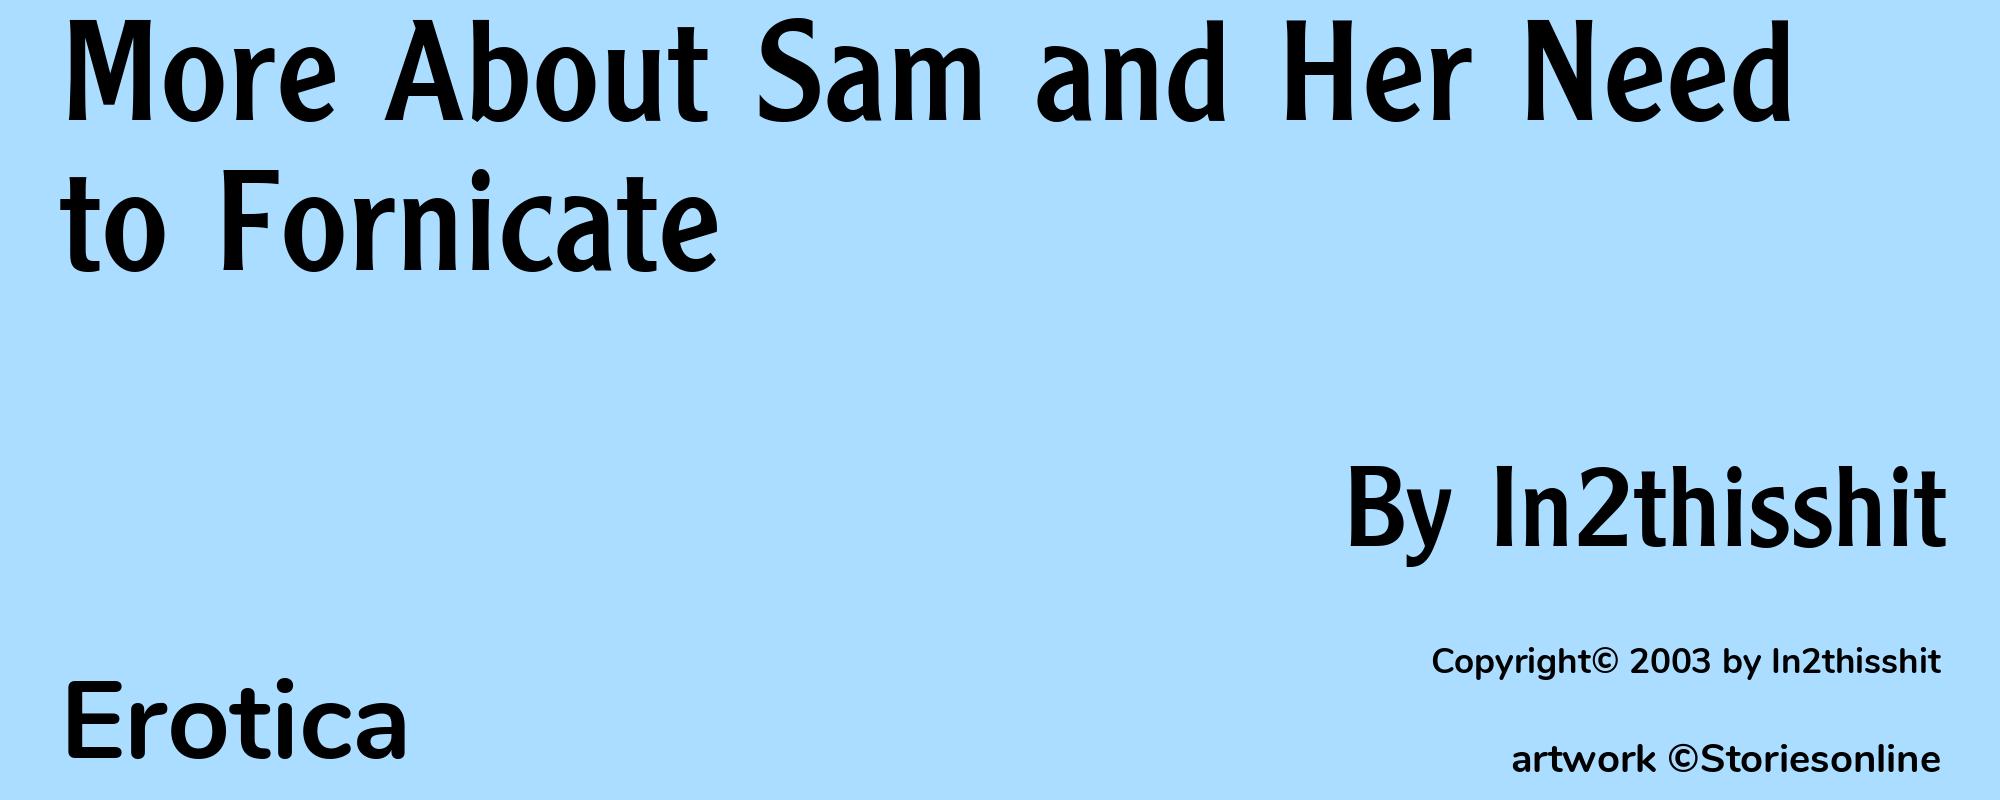 More About Sam and Her Need to Fornicate - Cover